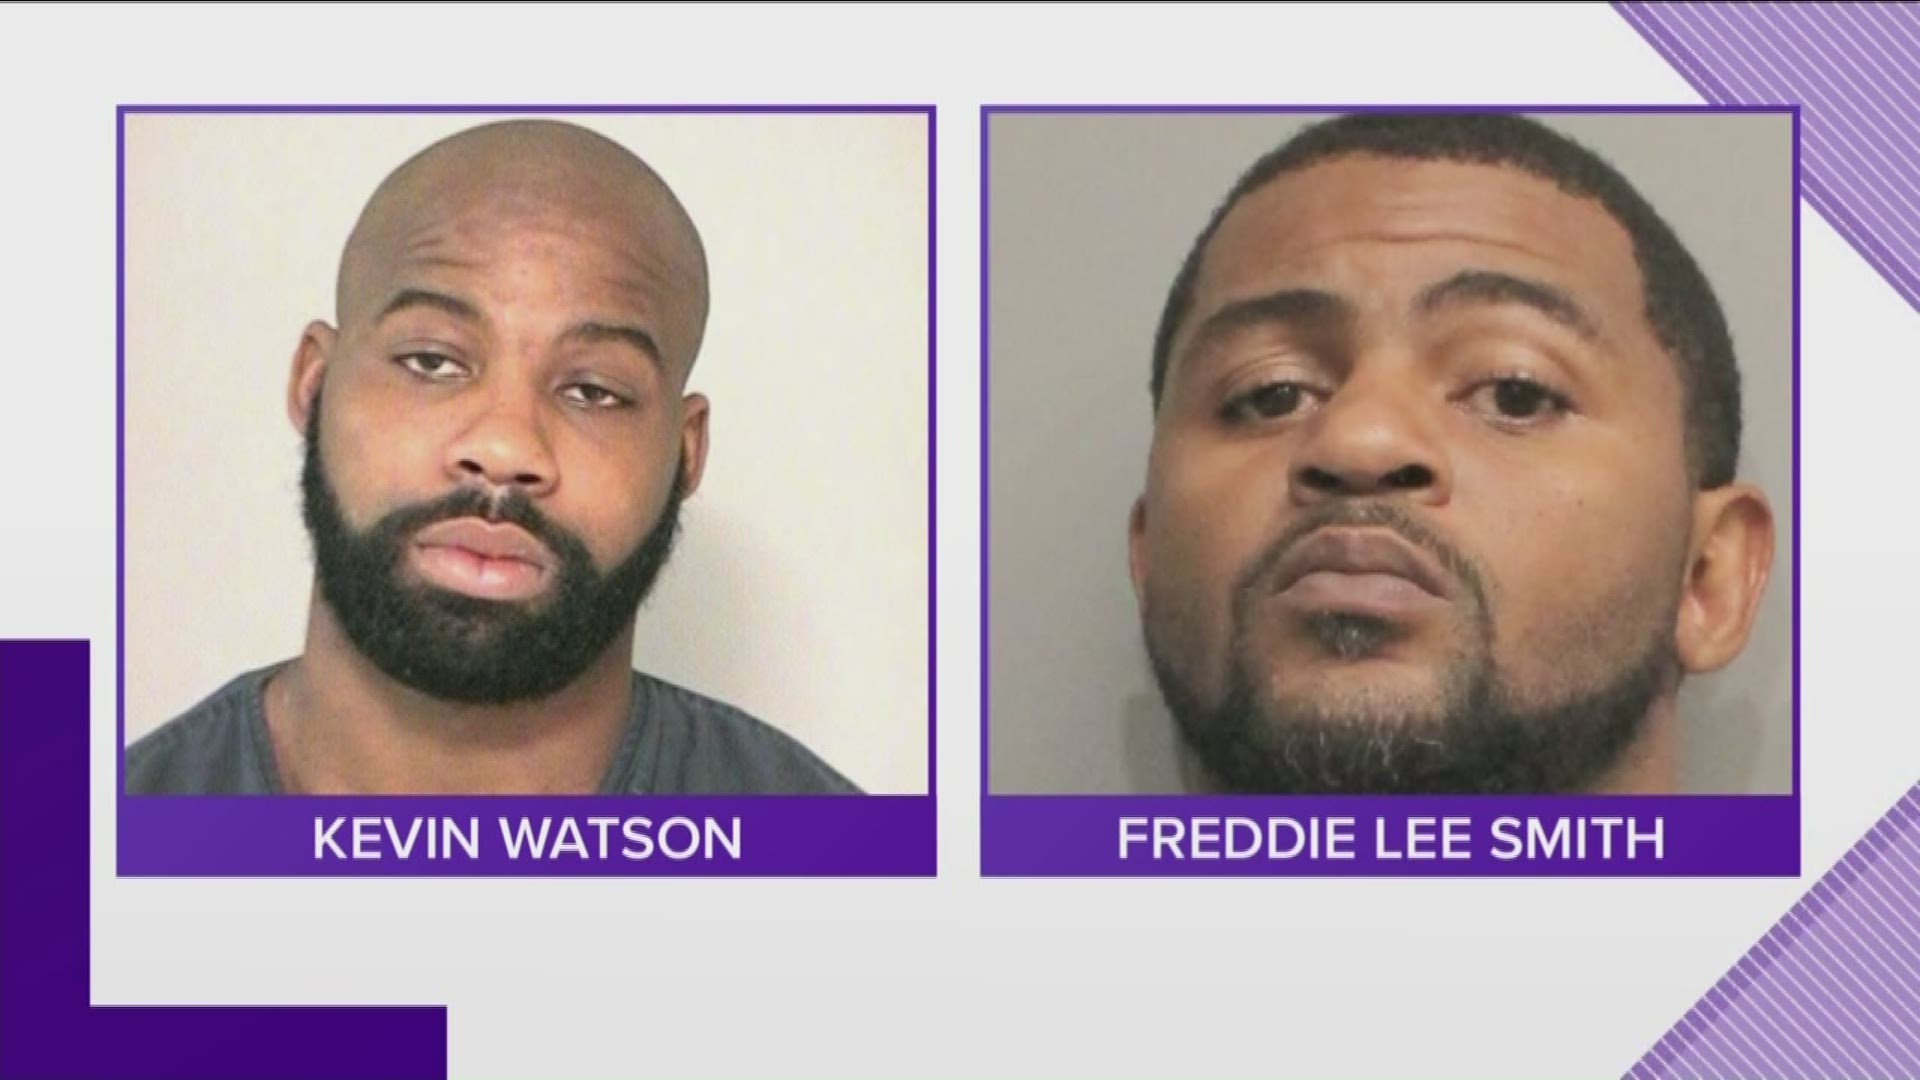 Court records say Kevin Watson and Freddie Lee Smith are charged with capital murder in the murder-for-hire scheme.